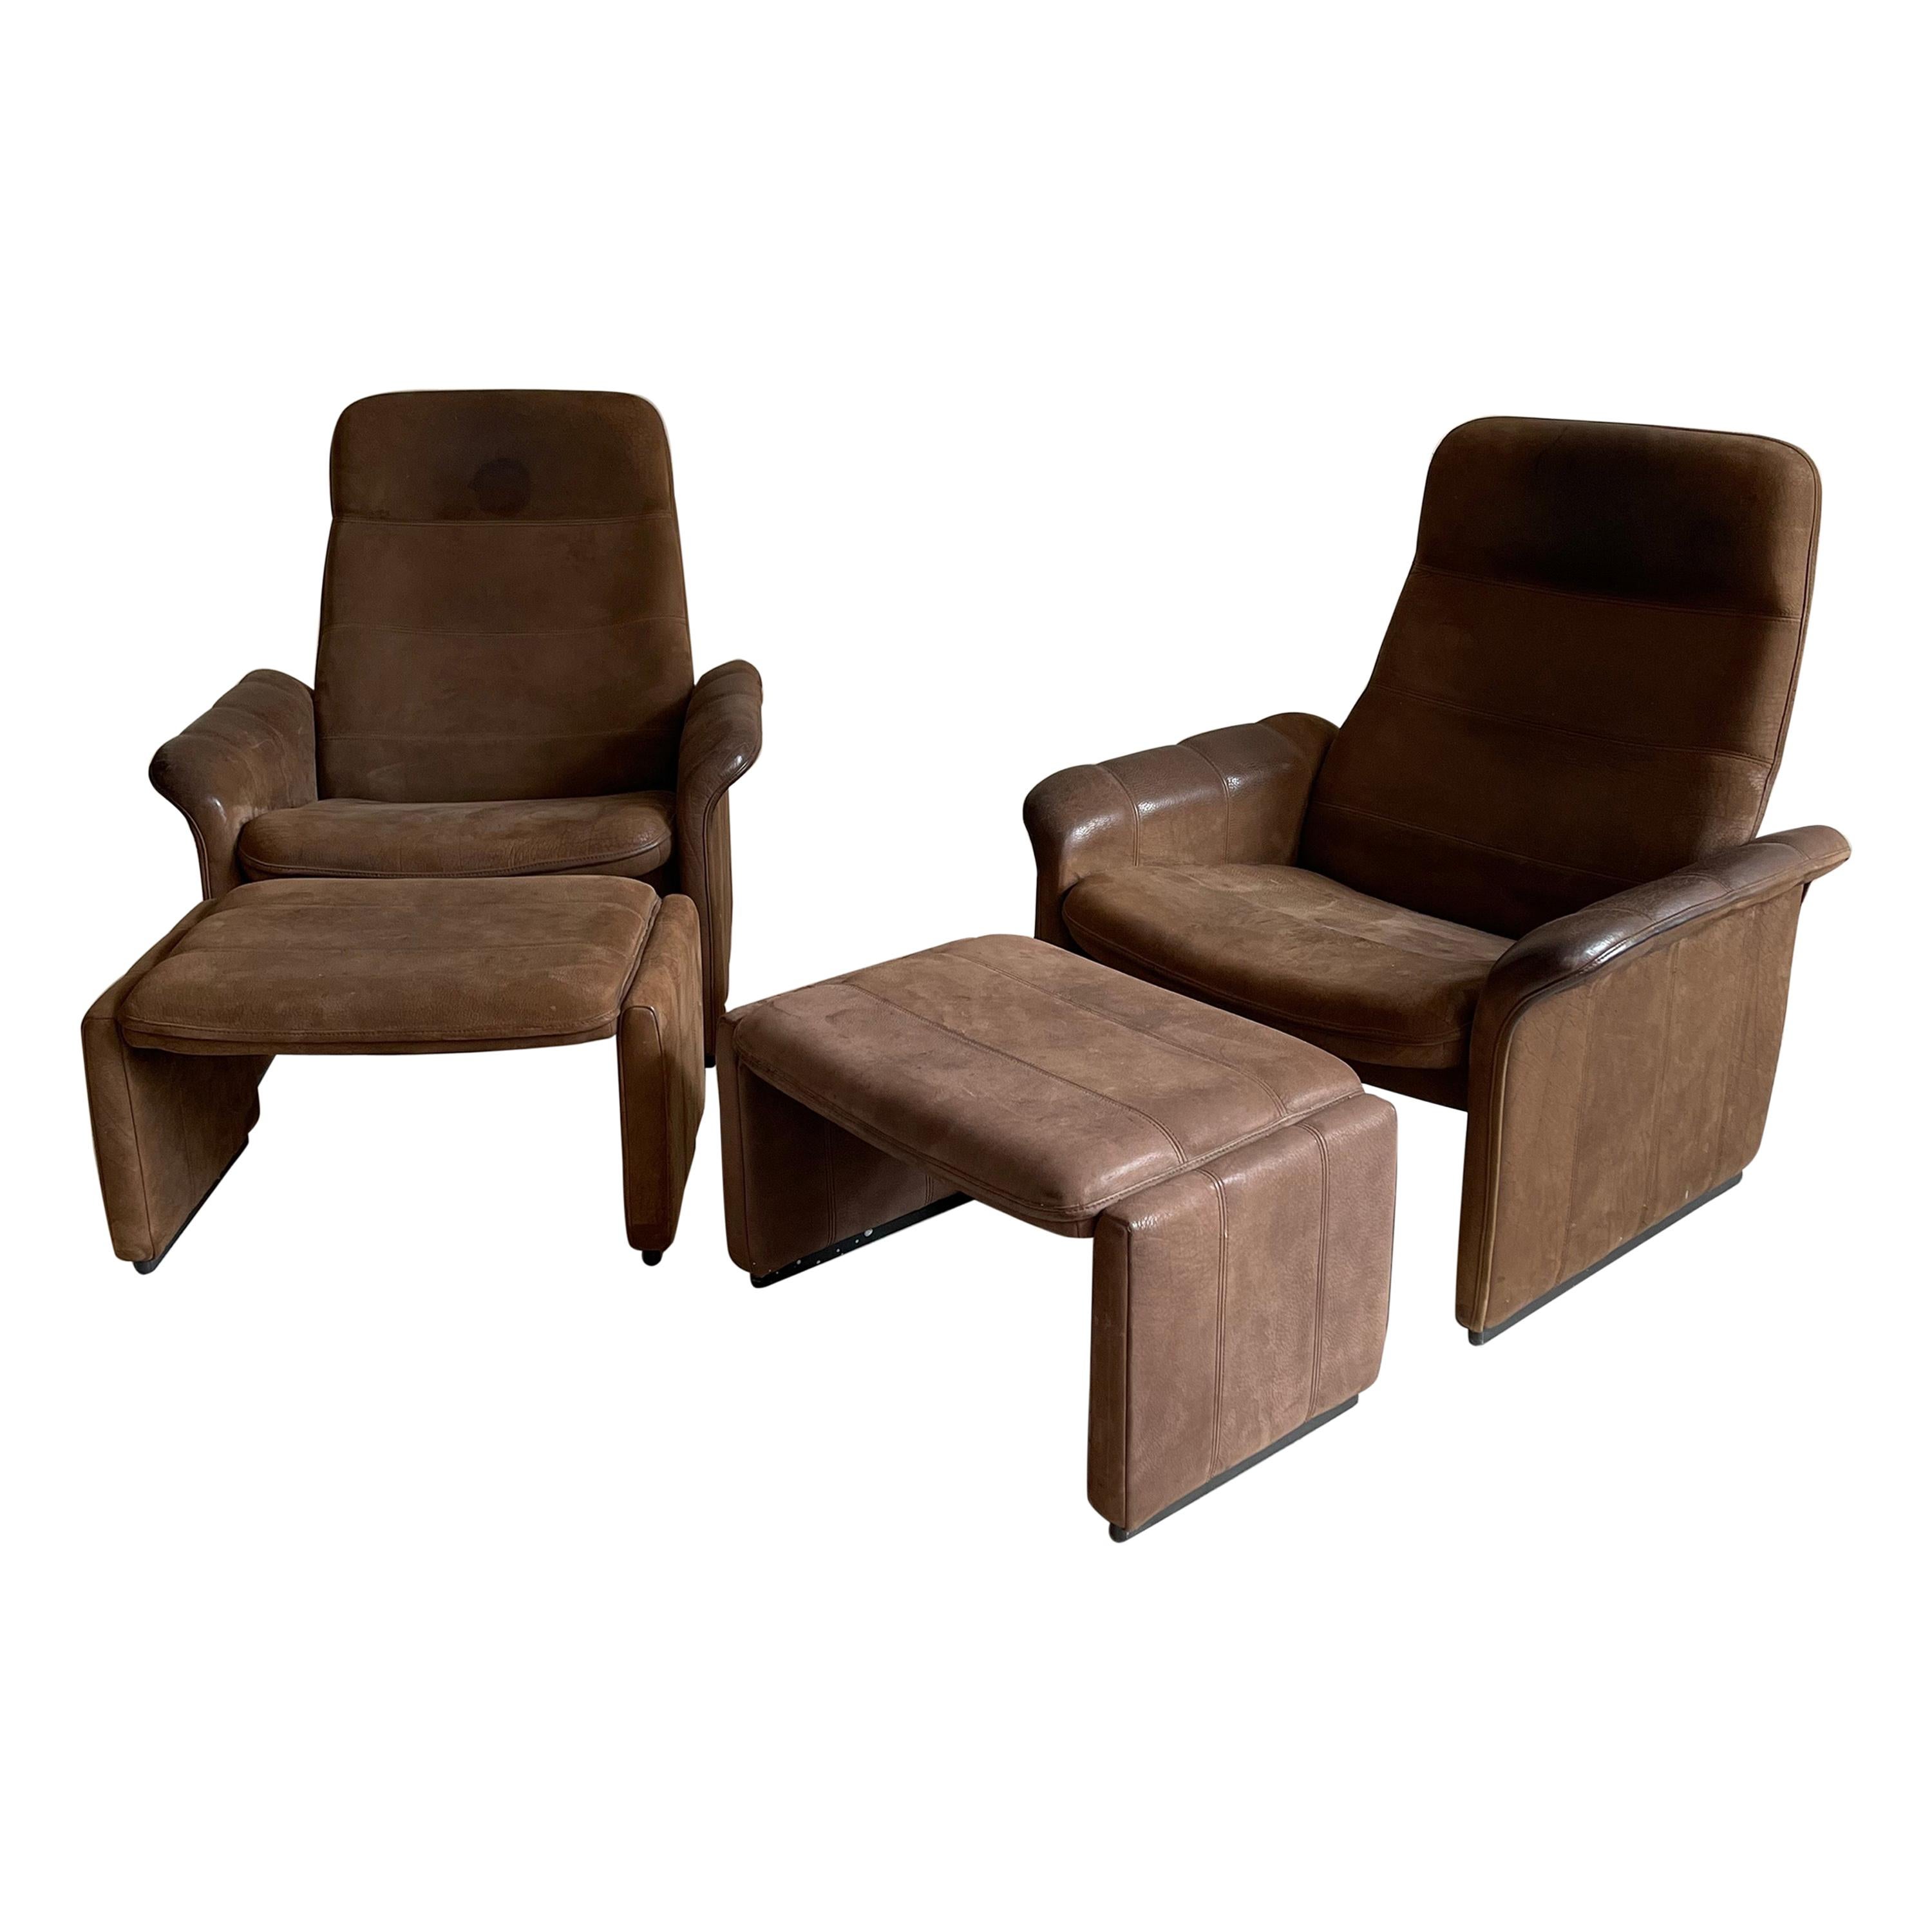 De Sede Pair Patinated Cognac Leather Reclining DS50 Chairs, Switzerland, 1970s